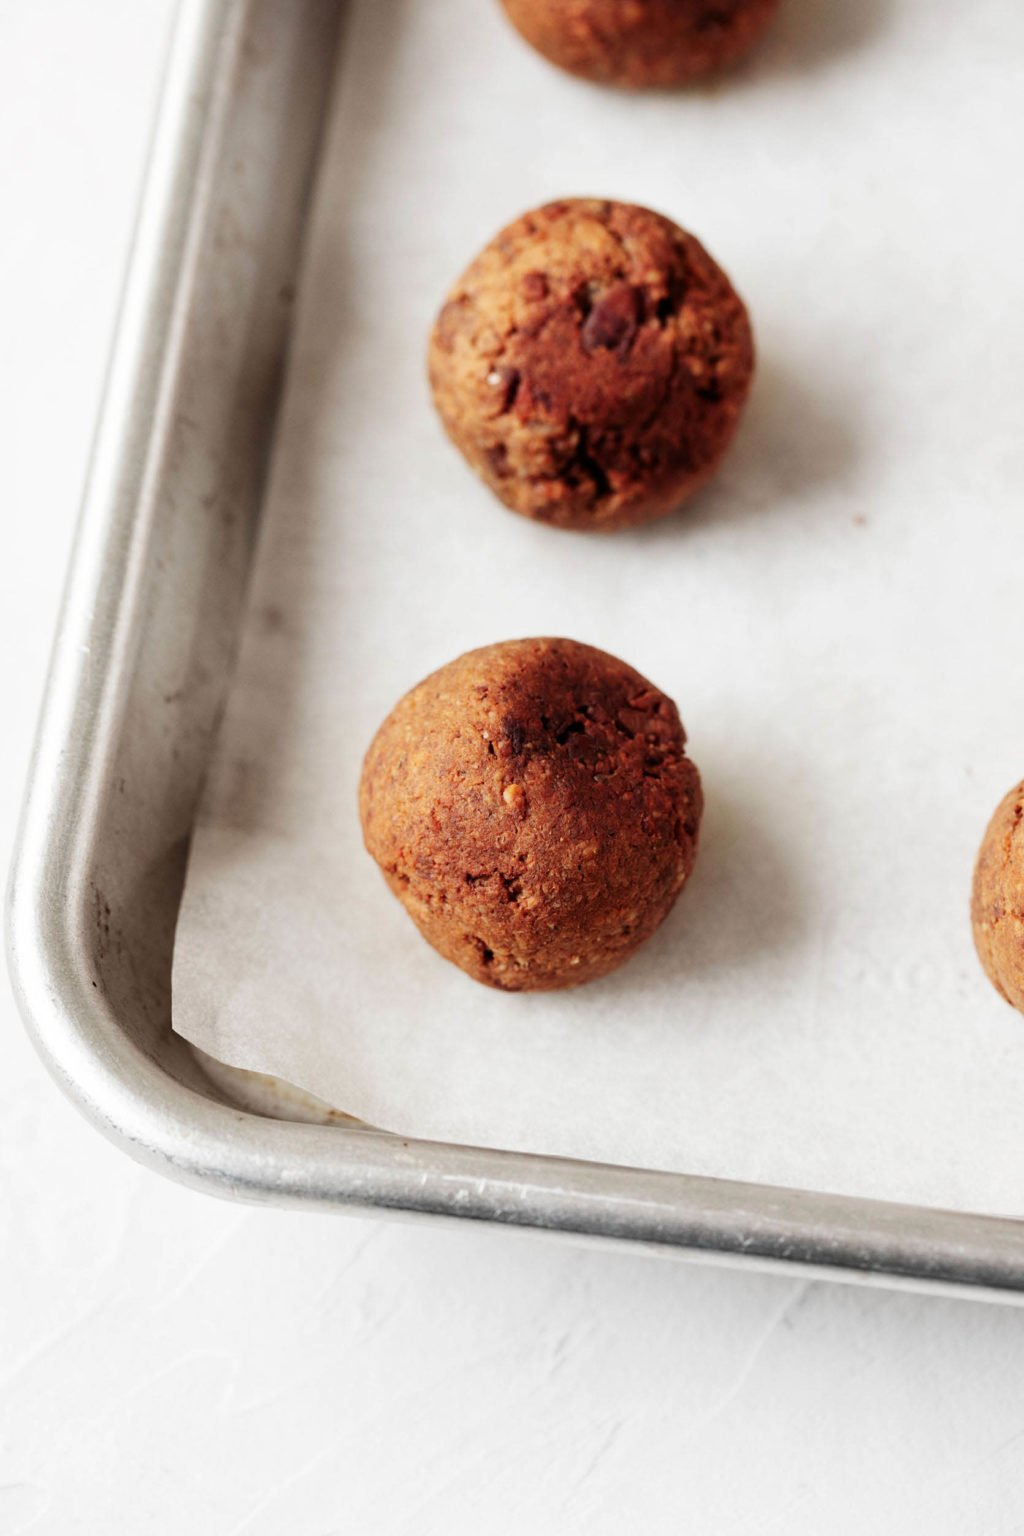 A parchment lined, silver, rimmed baking sheet holds a vegan protein dish that's just come out of the oven.